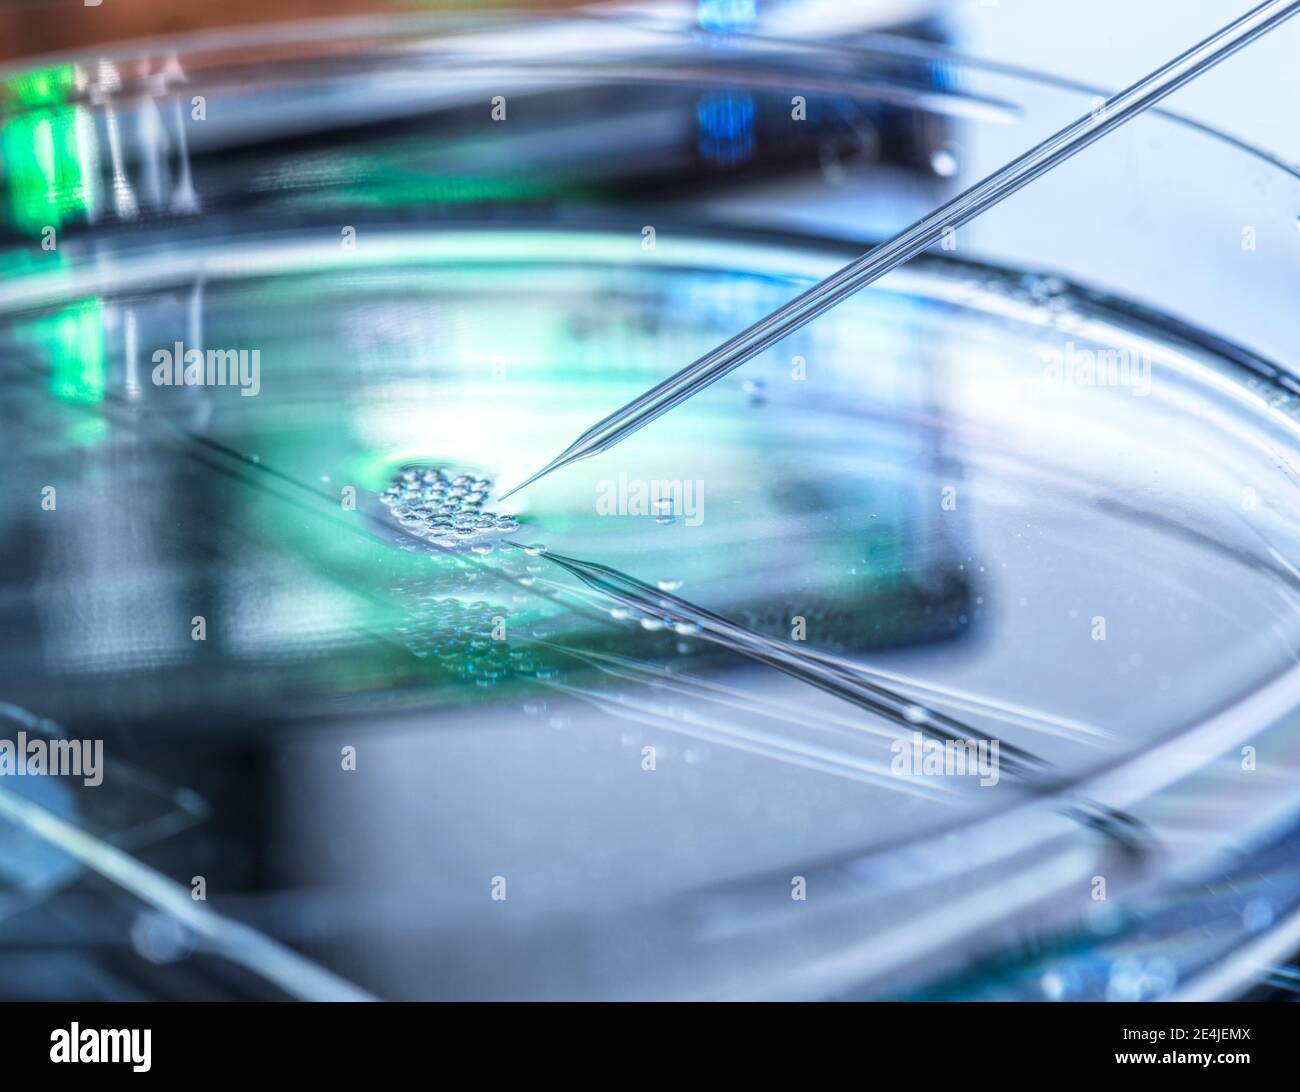 Scientific research of nuclear transfer being carried out on several embryonic stem cells used in cloning and genetic modification Stock Photo